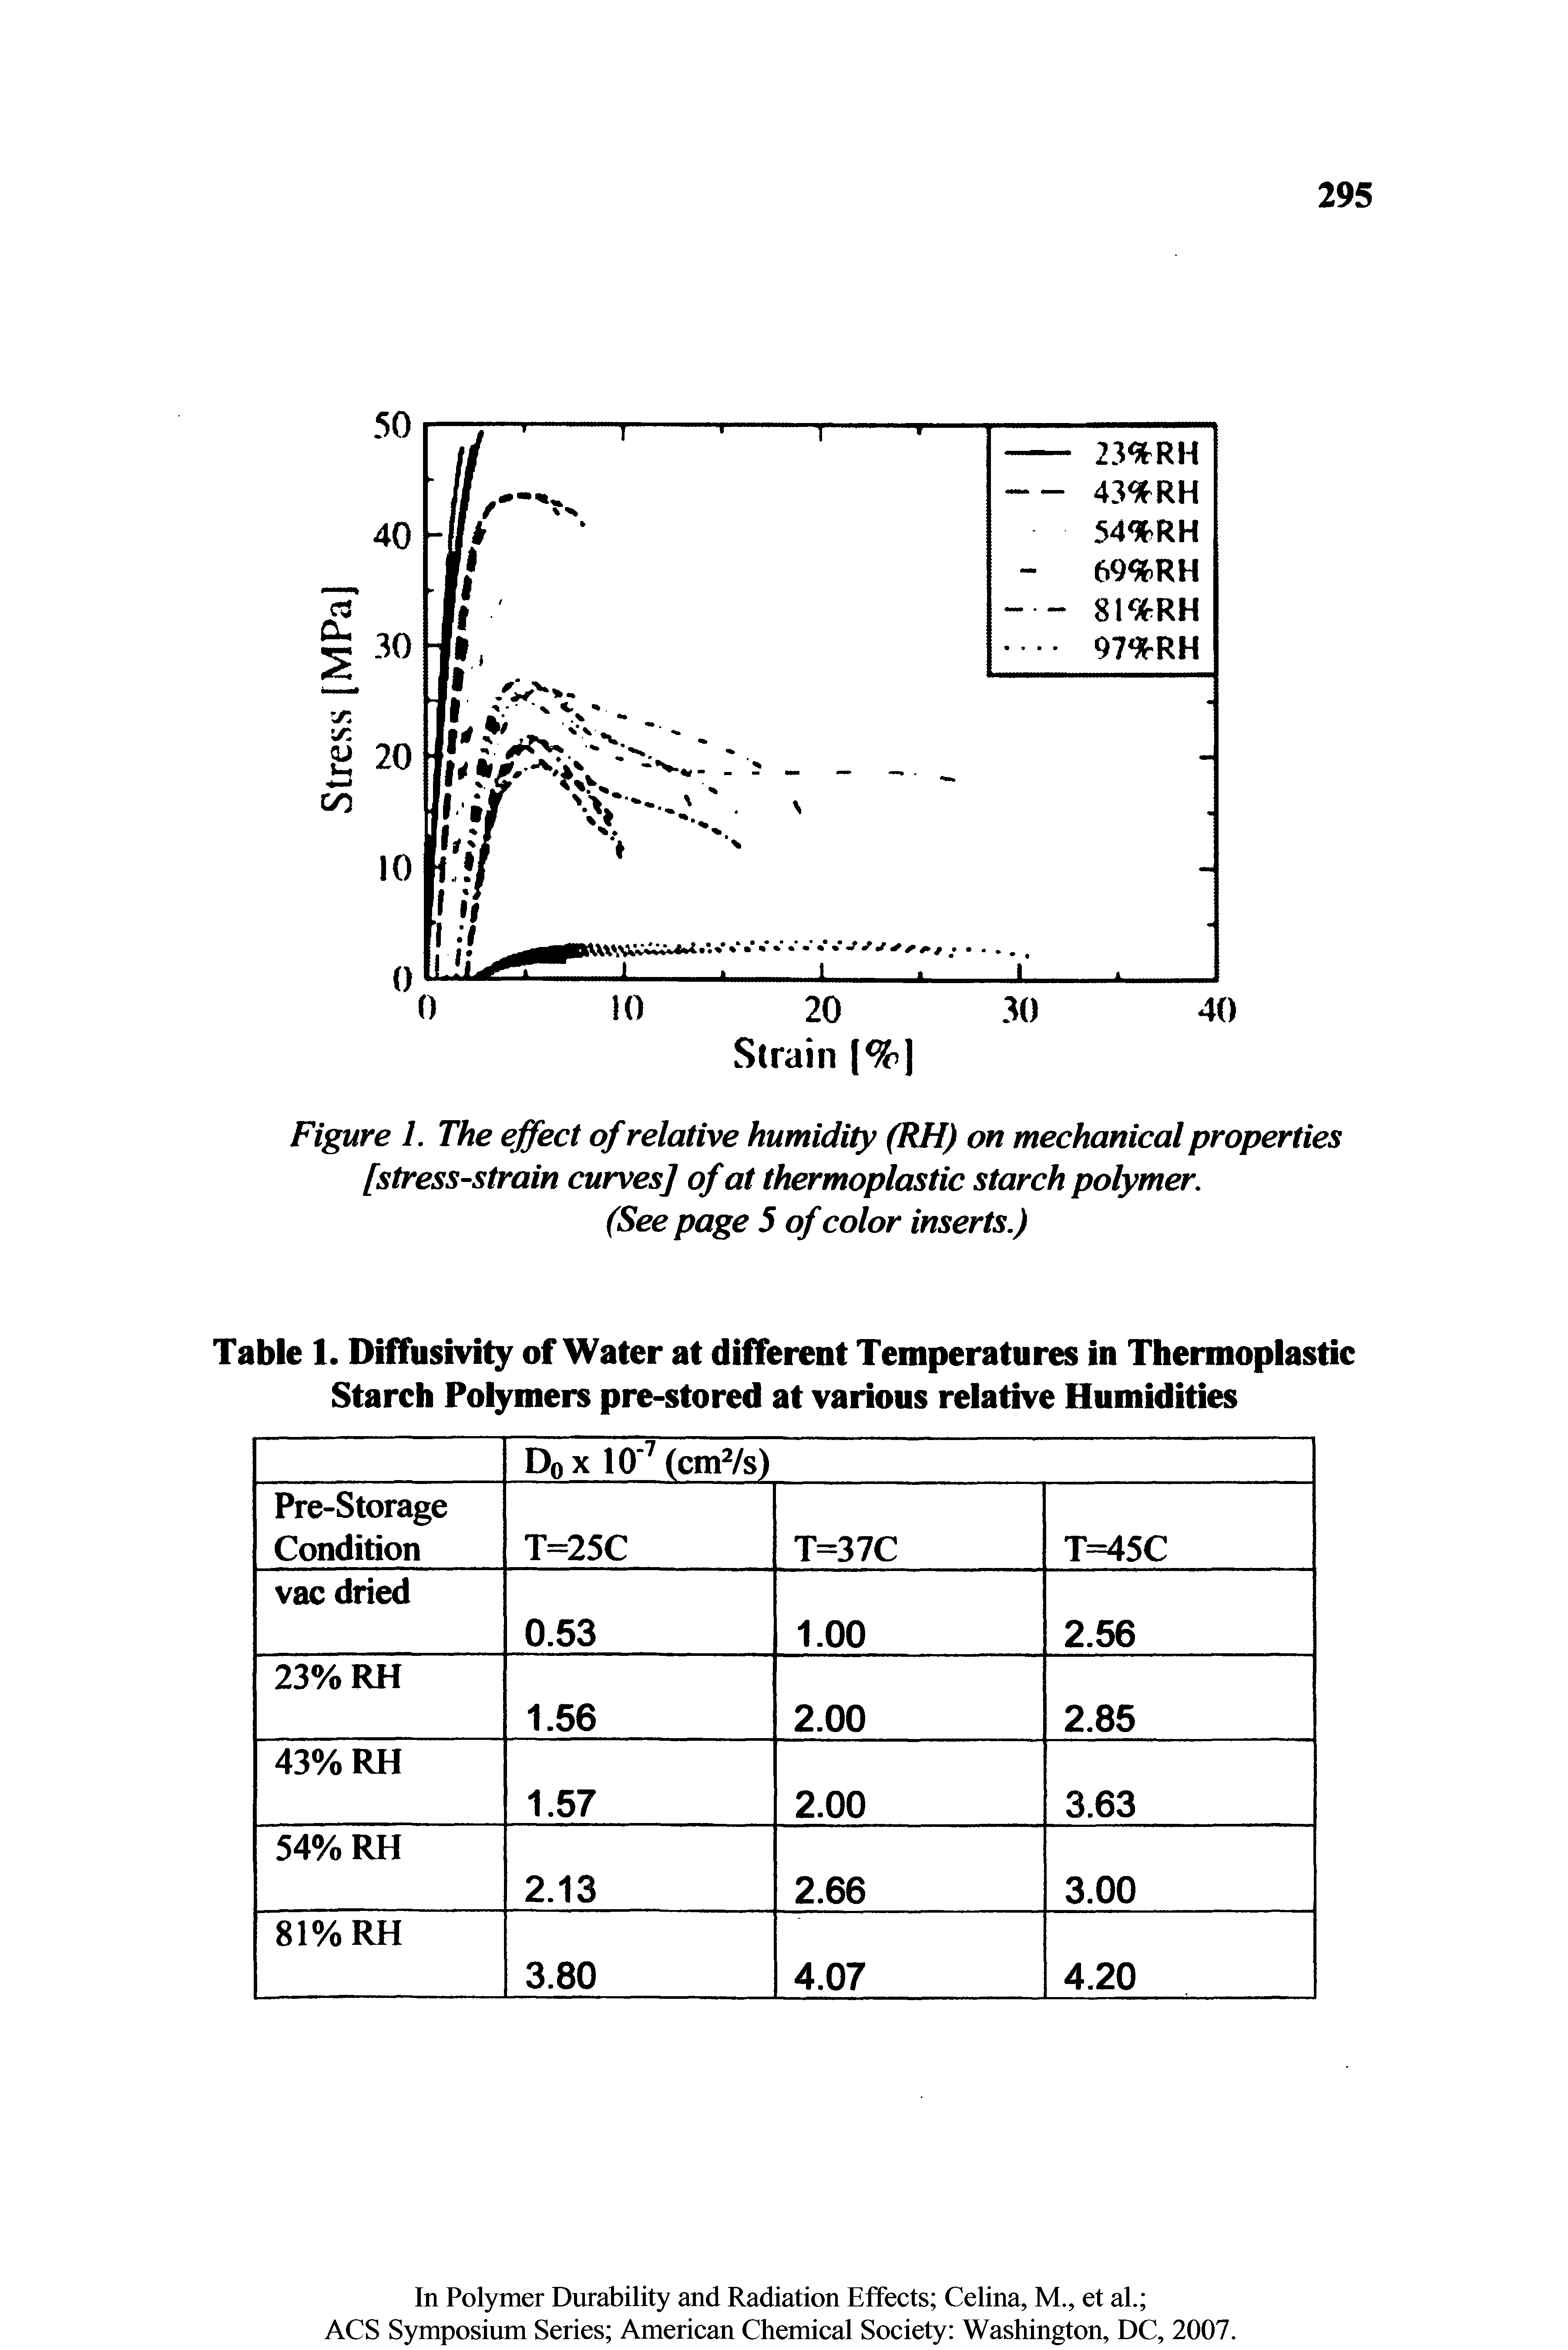 Figure 1. The effect of relative humidity (RH) on mechanical properties [stress-strain curves] of at thermoplastic starch polymer.